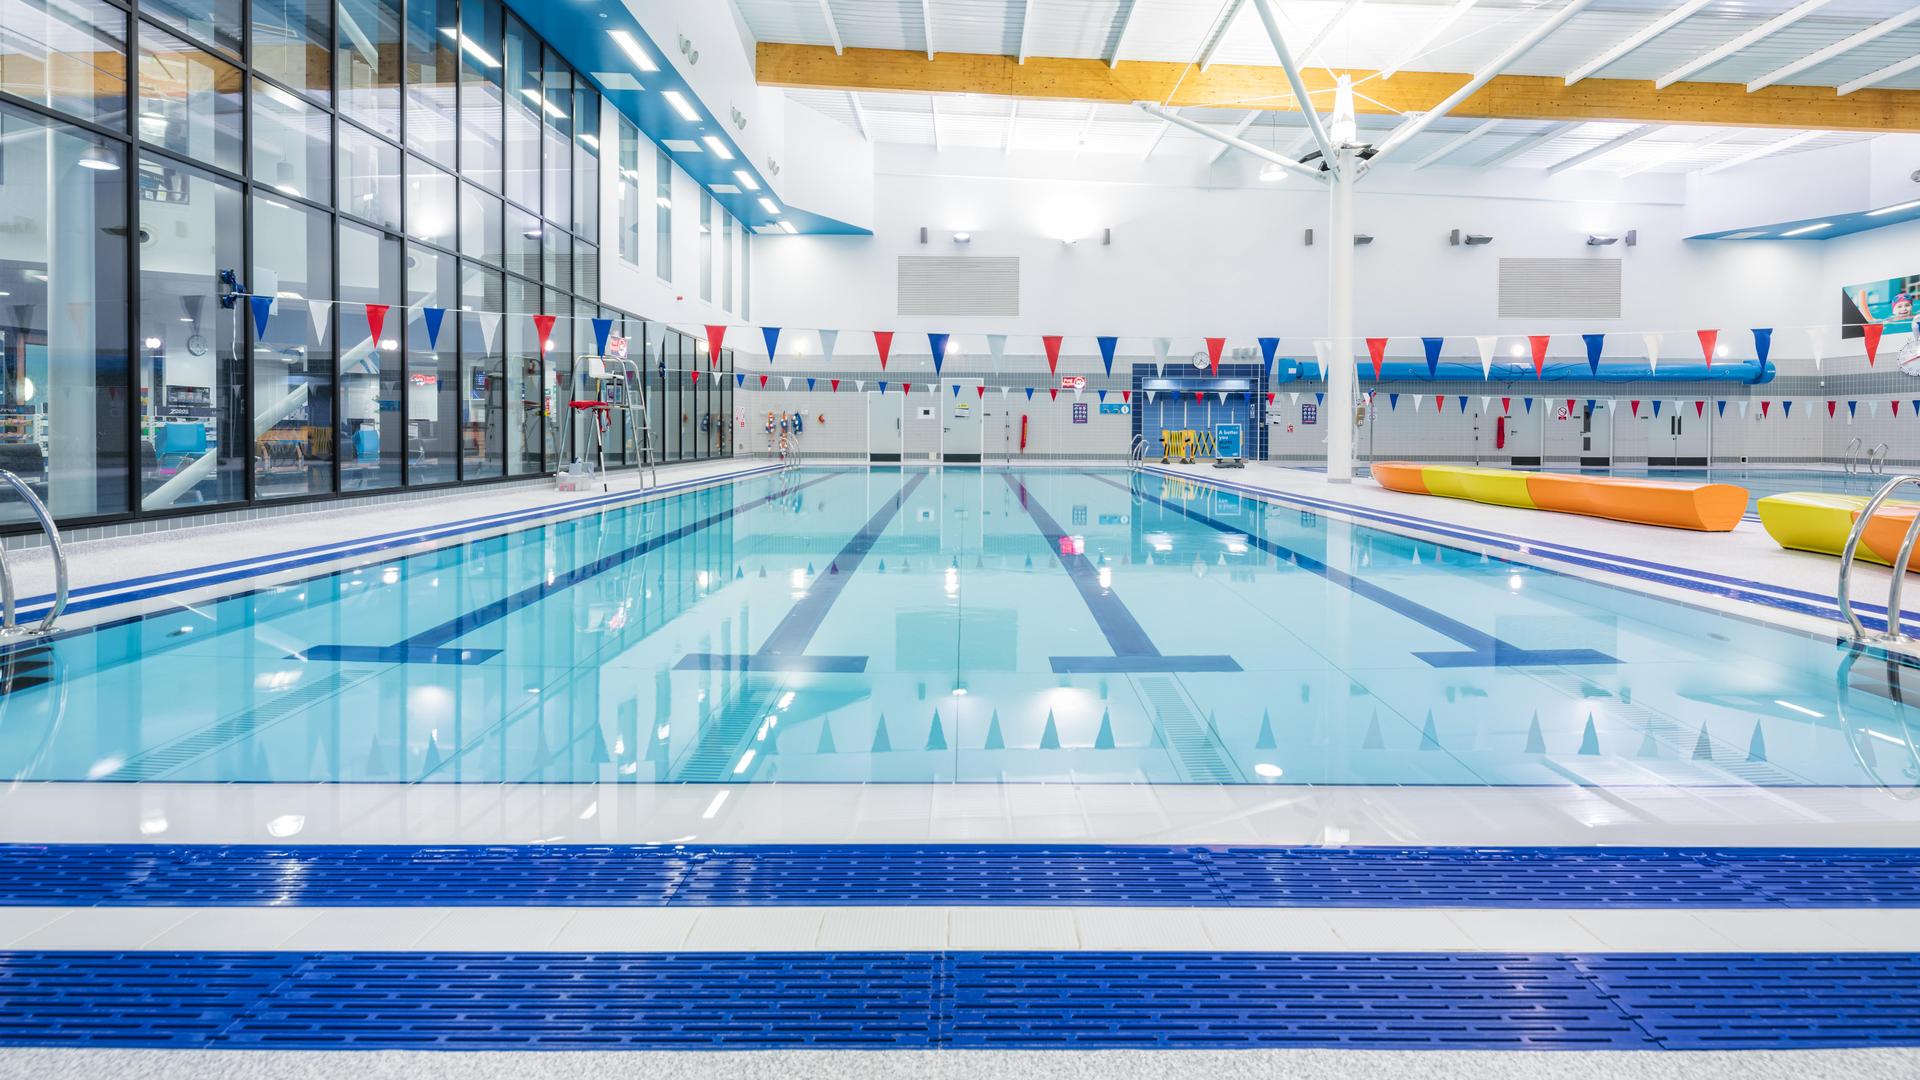 Pool at Consett Leisure Centre